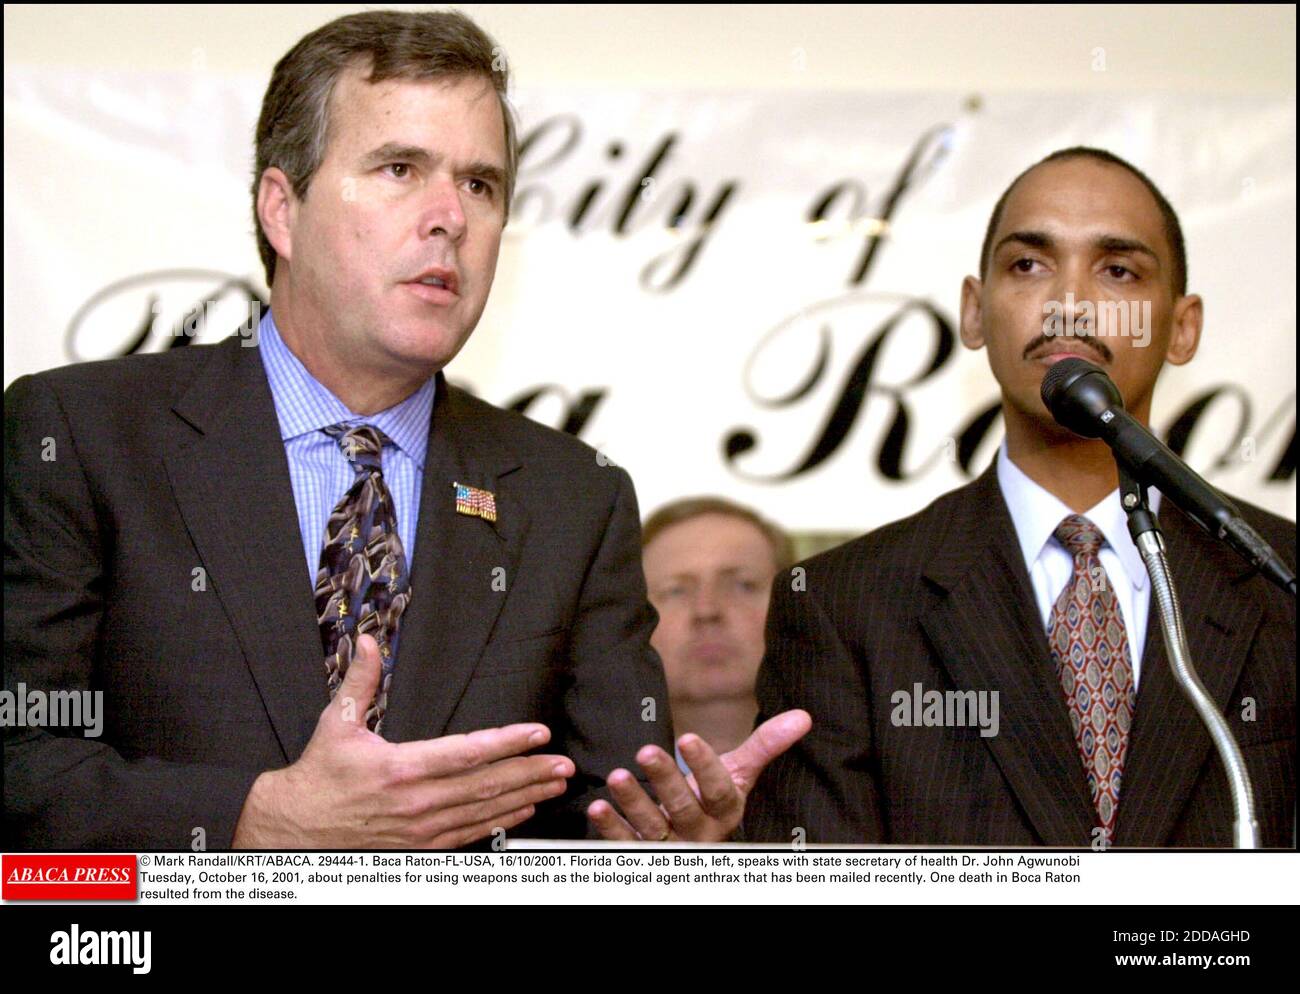 NO FILM, NO VIDEO, NO TV, NO DOCUMENTARY - © Mark Randall/KRT/ABACA. 29444-1. Baca Raton-FL-USA, 16/10/2001. Florida Gov. Jeb Bush, left, speaks with state secretary of health Dr. John Agwunobi Tuesday, October 16, 2001, about penalties for using weapons such as the biological agent anthrax that h Stock Photo